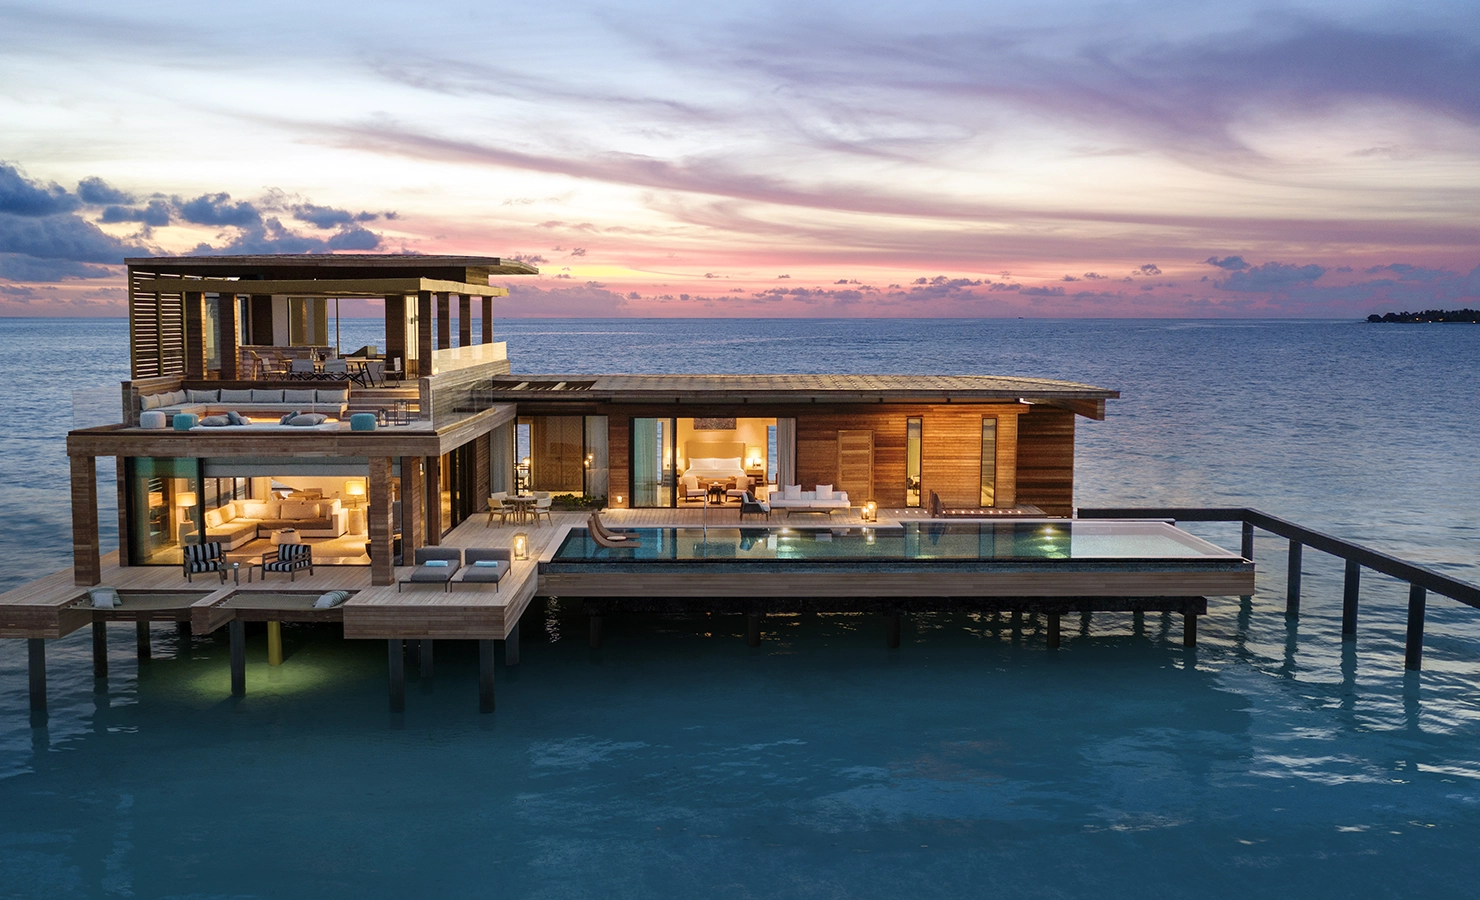 Perfect Hideaways, Waldorf Maldives, Luxury accommodation view of the house during sunset with the ocean in the background